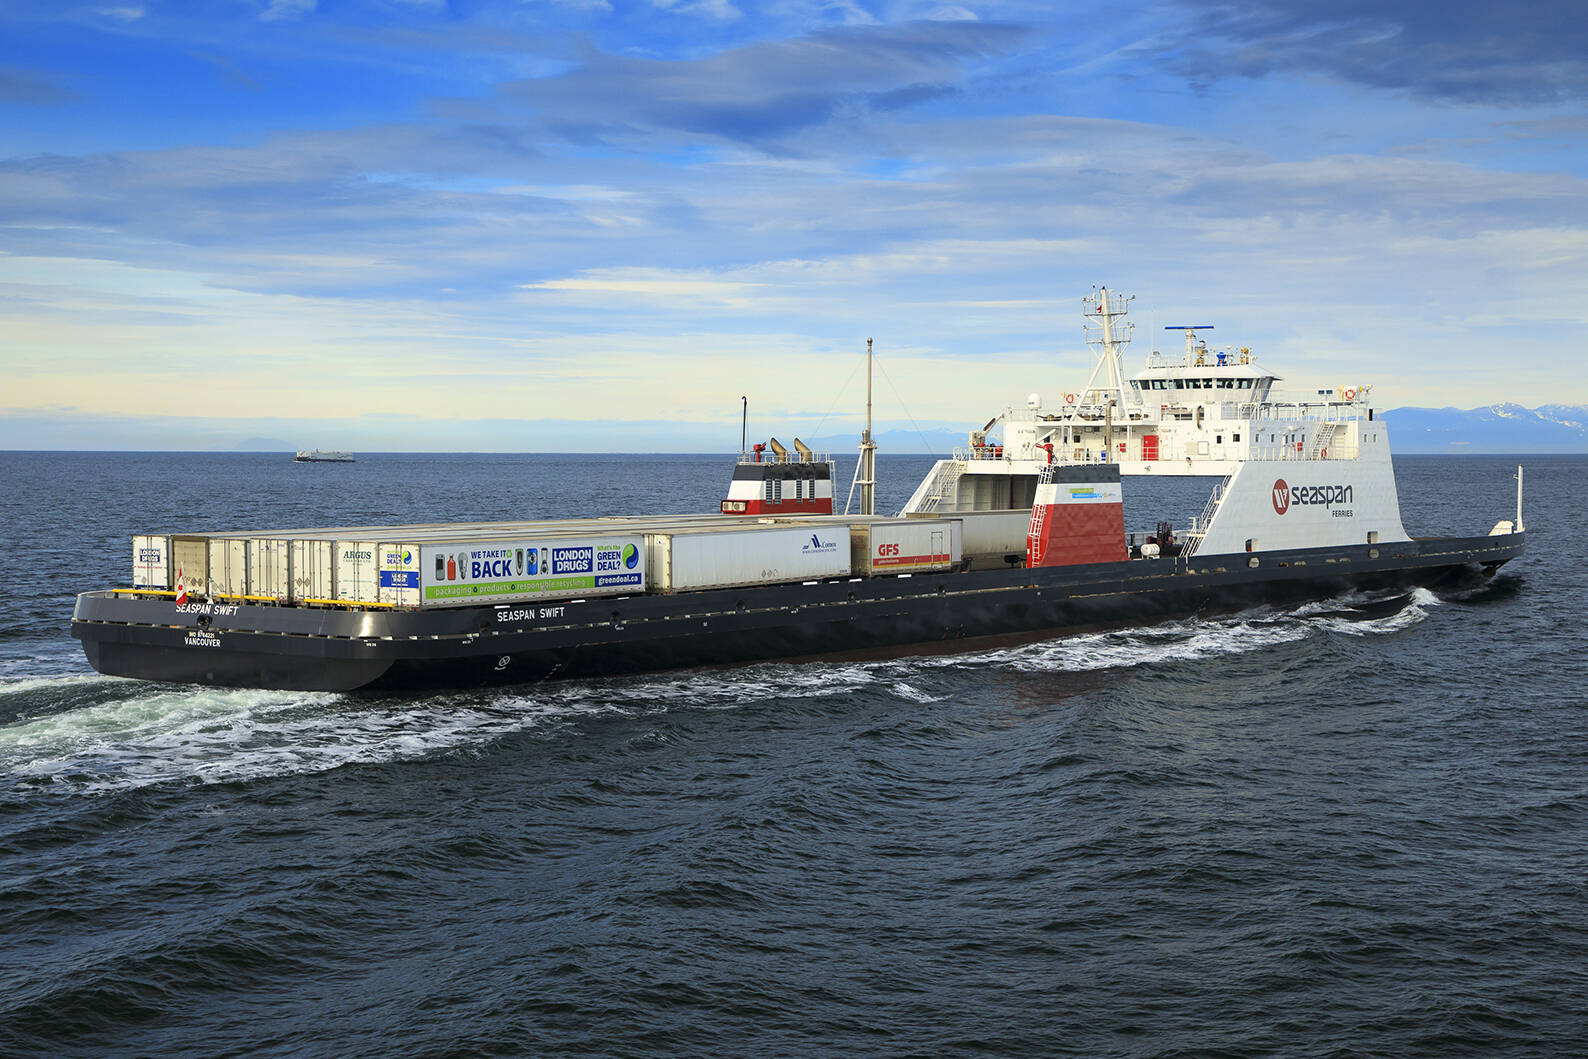 Seaspan Ferries has become the first Canadian marine company to pilot the use of renewable natural gas for its marine fleet. (Seaspan Ferries photo)